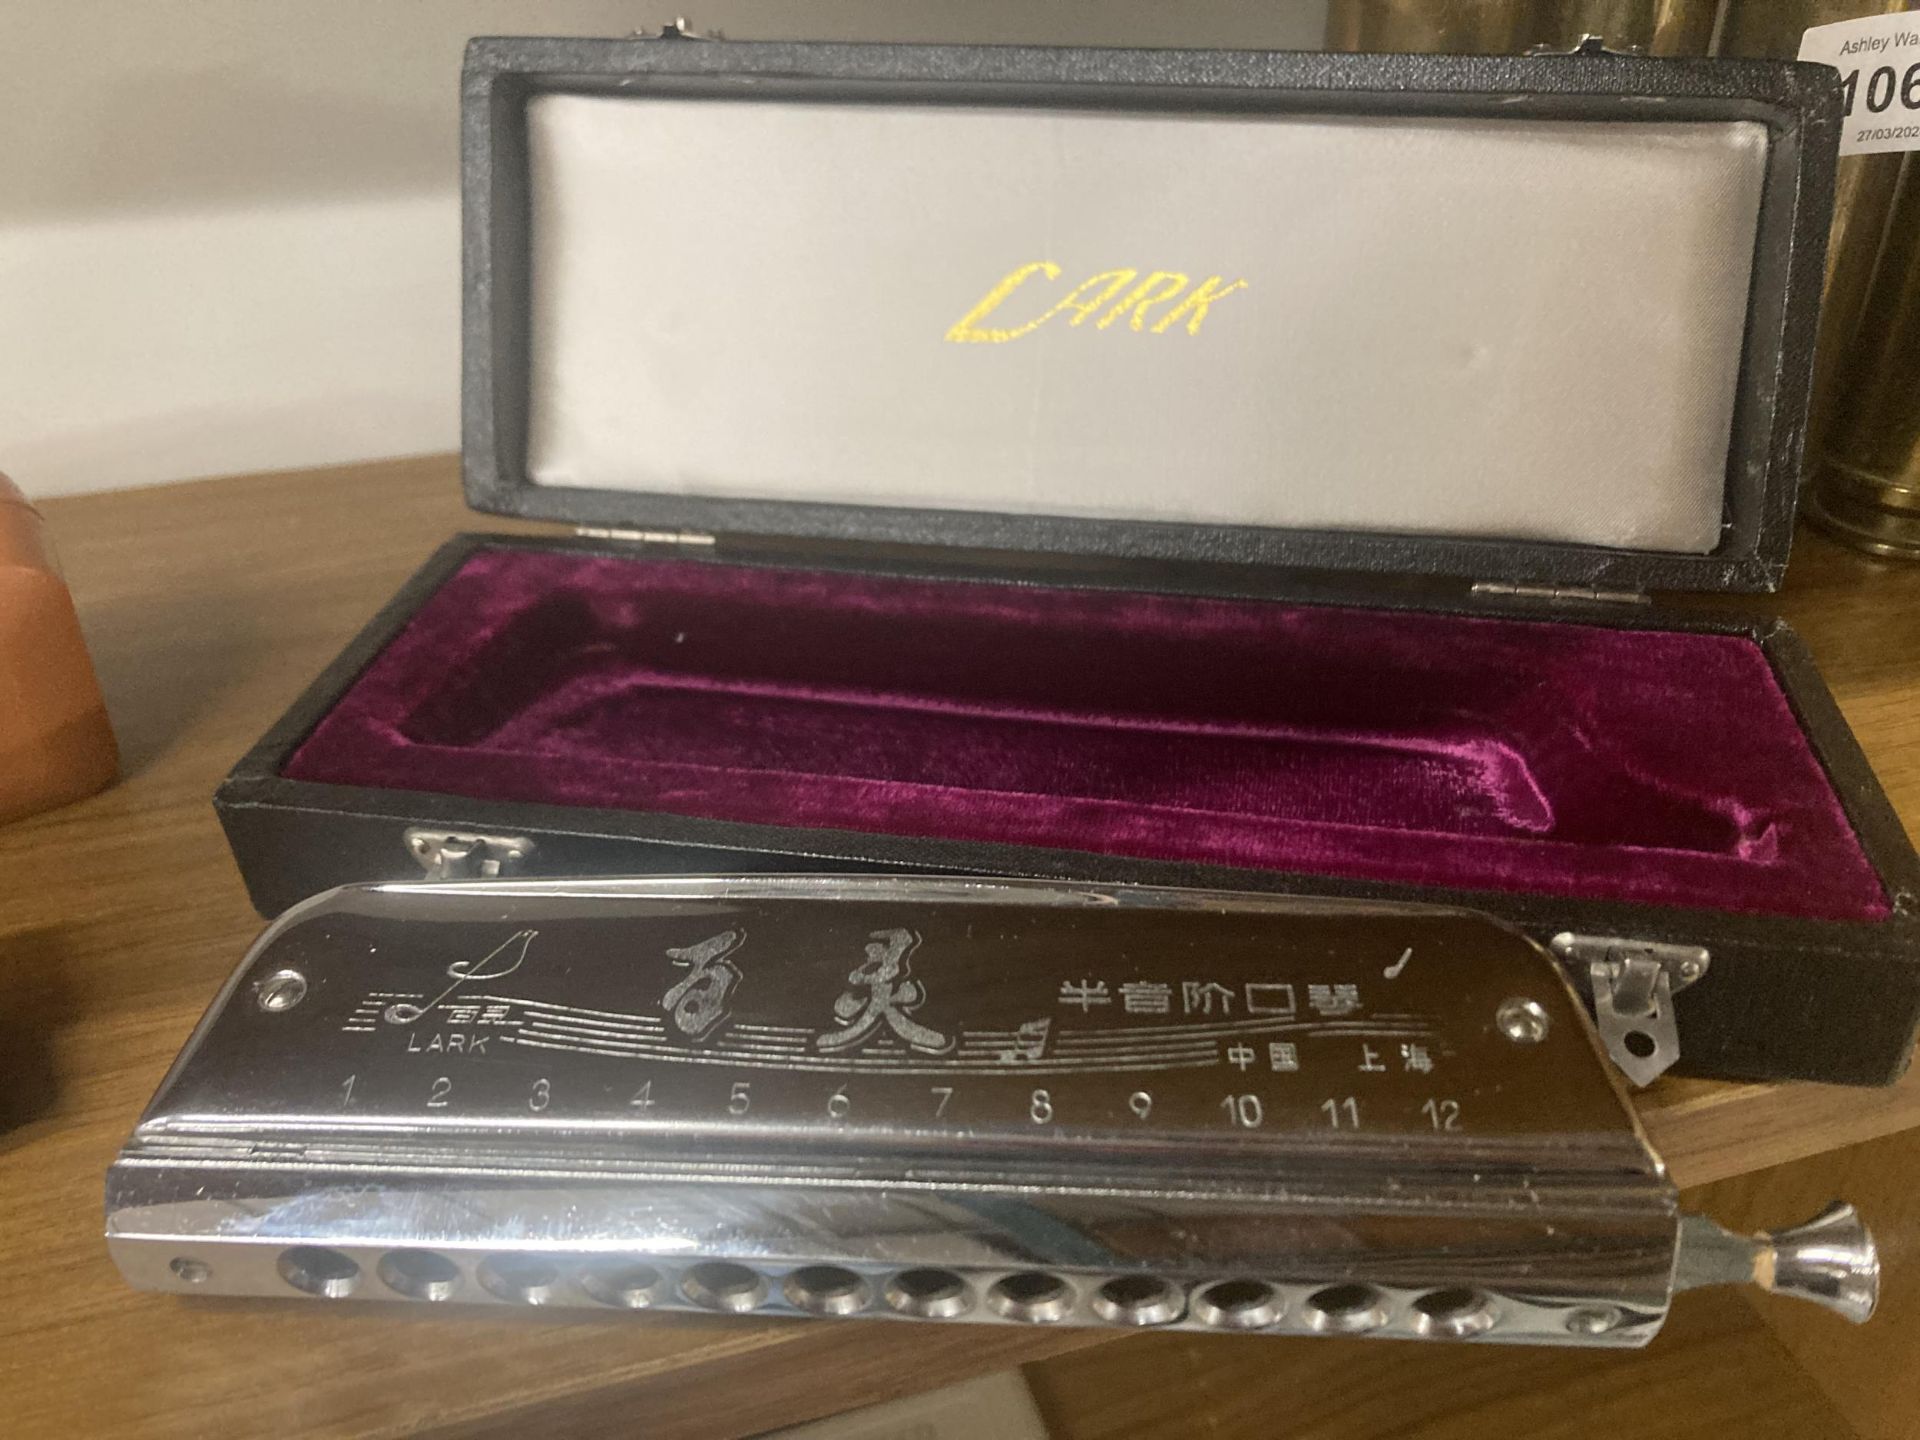 TWO HARMONICAS TO INCLUDE A HOHNER SPECIAL 20 AND A LARK CHROMATIC HARMONICA - Image 3 of 3